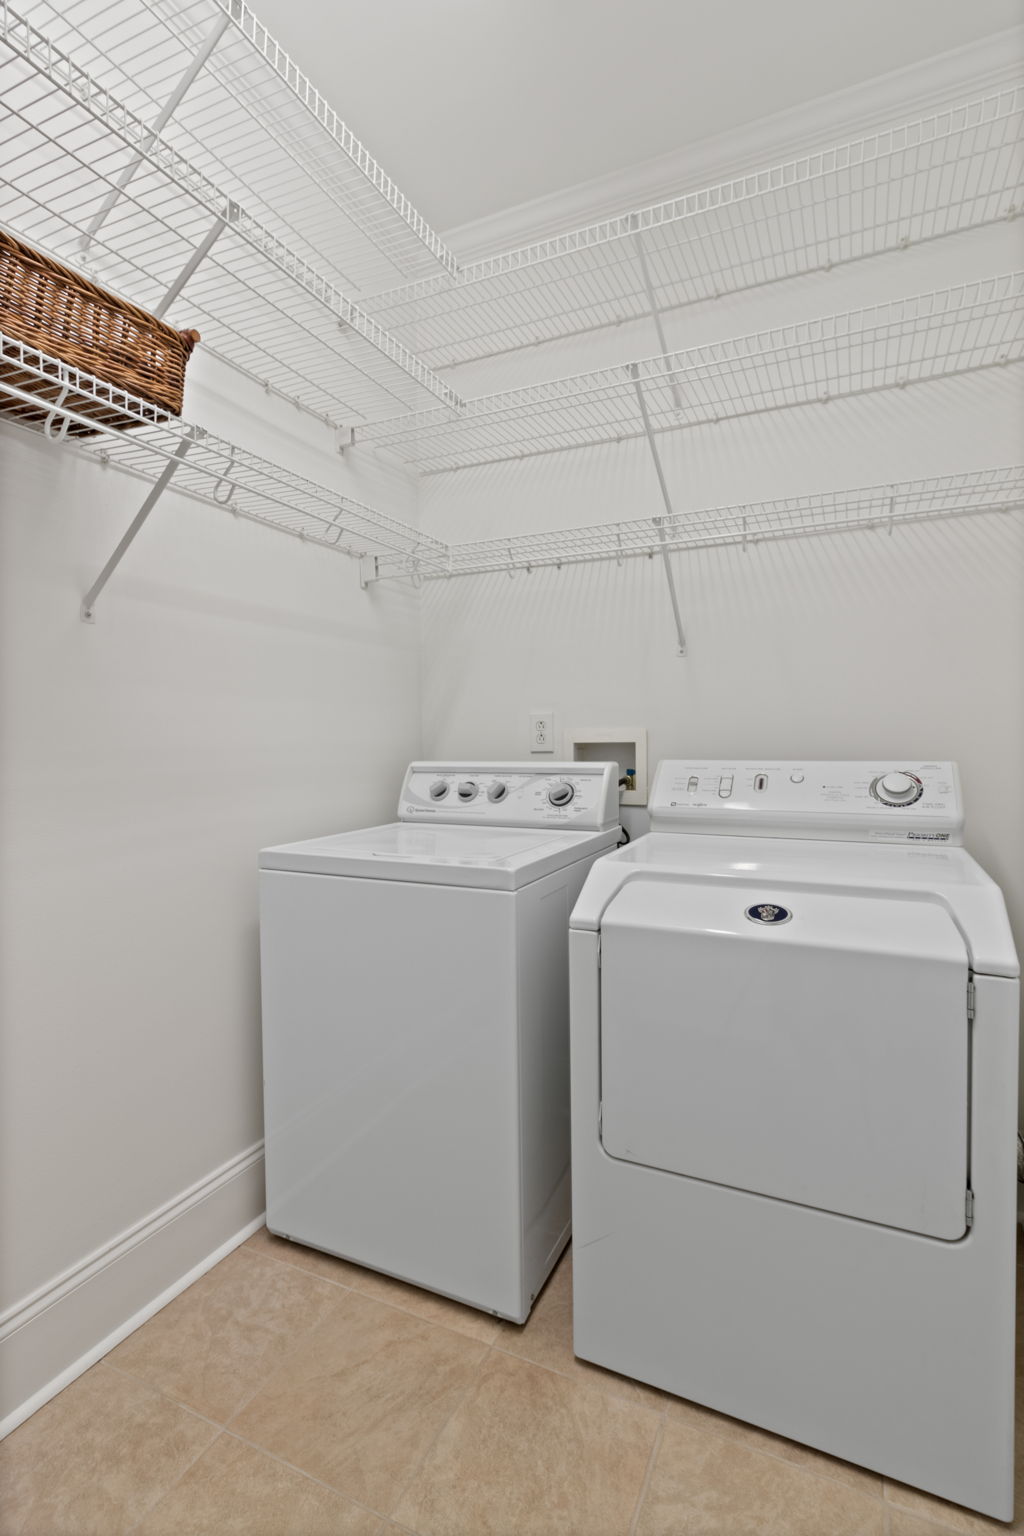 Washer/Dryer in true laundry room with storage shelves on 3 walls